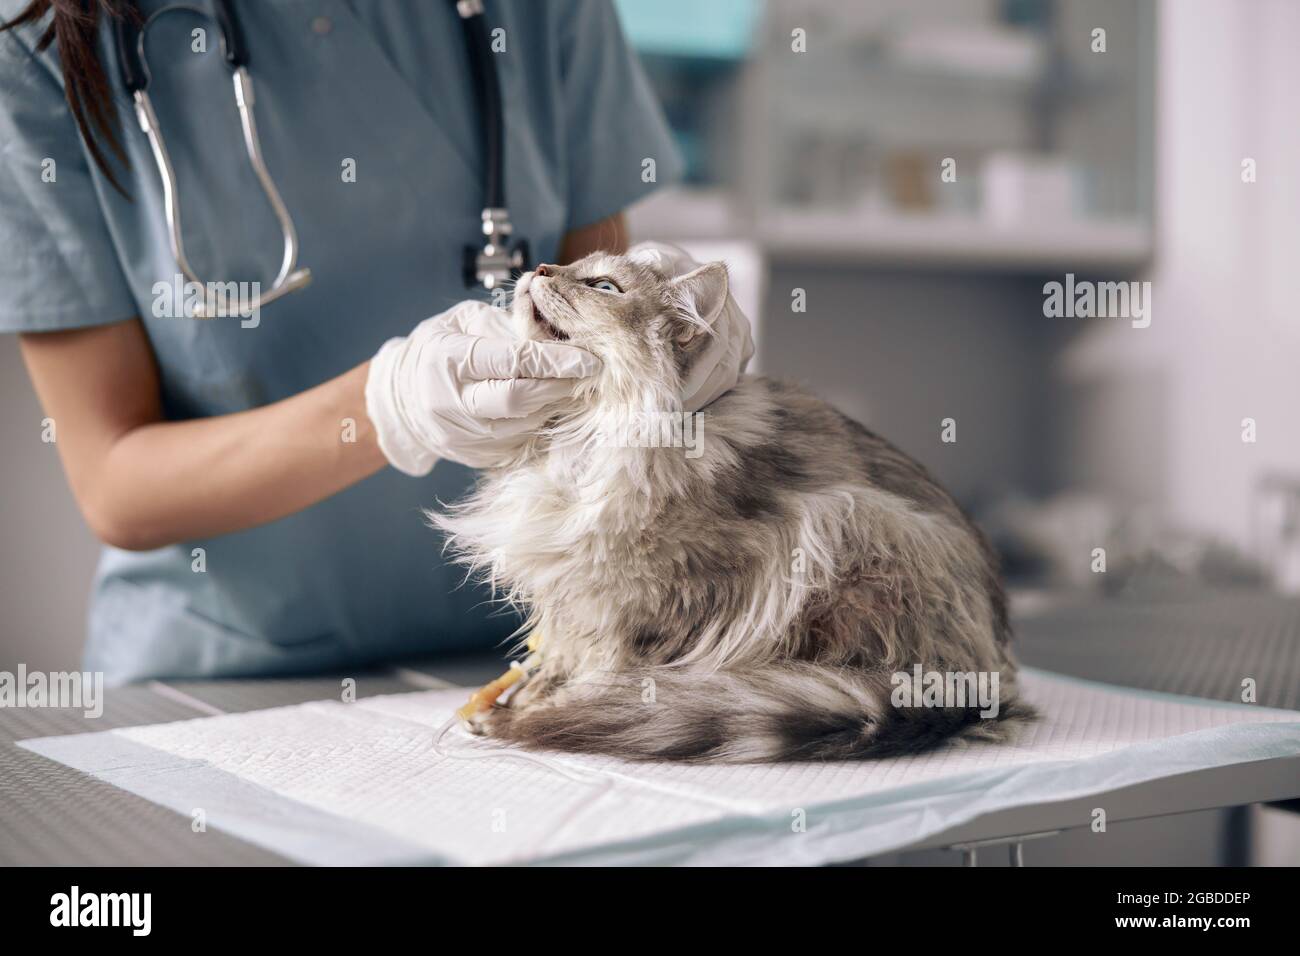 Veterinarian in latex gloves examines cat on table in hospital Stock Photo